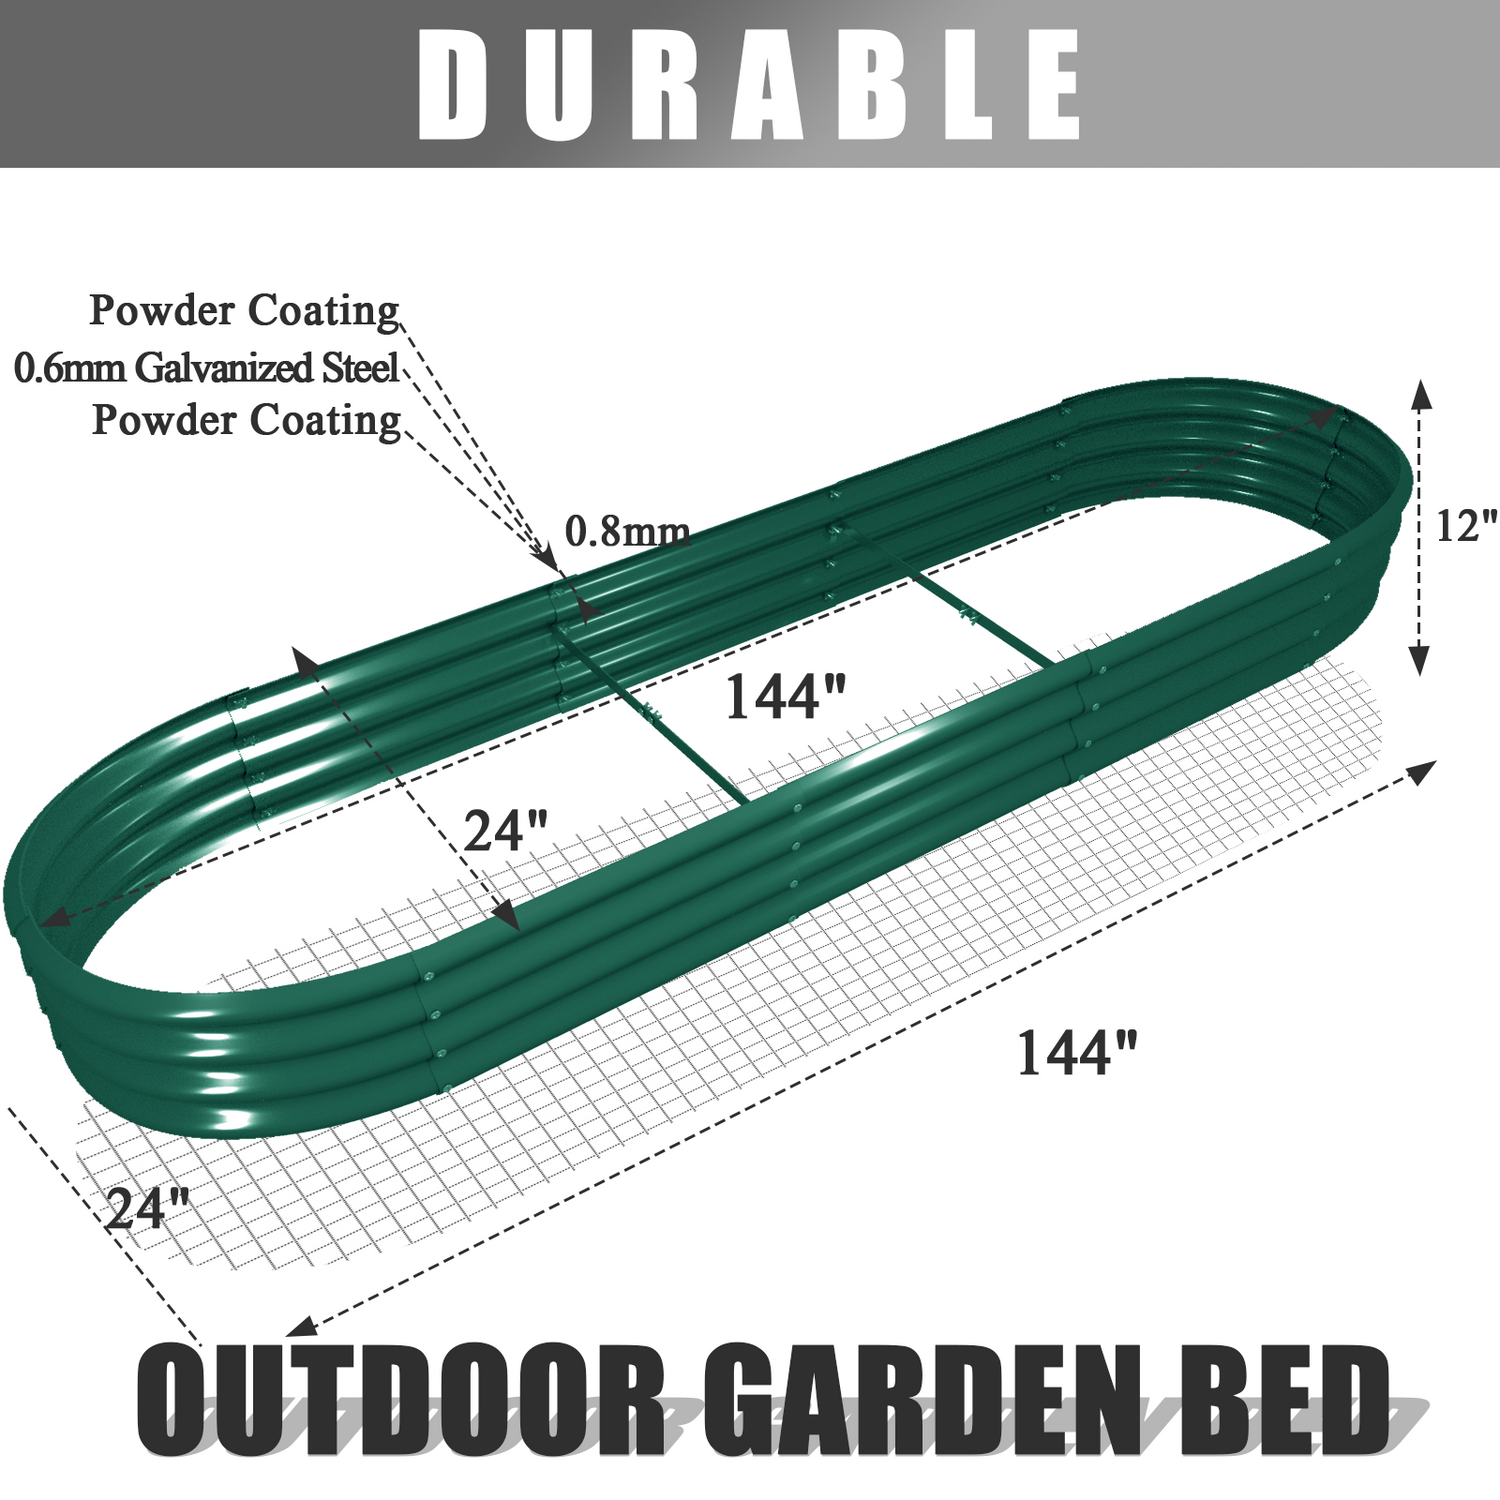 Bundle of 12 | 12" Tall 12x2ft Oval Metal Raised Garden Bed in Green with Gopher Wire Mesh